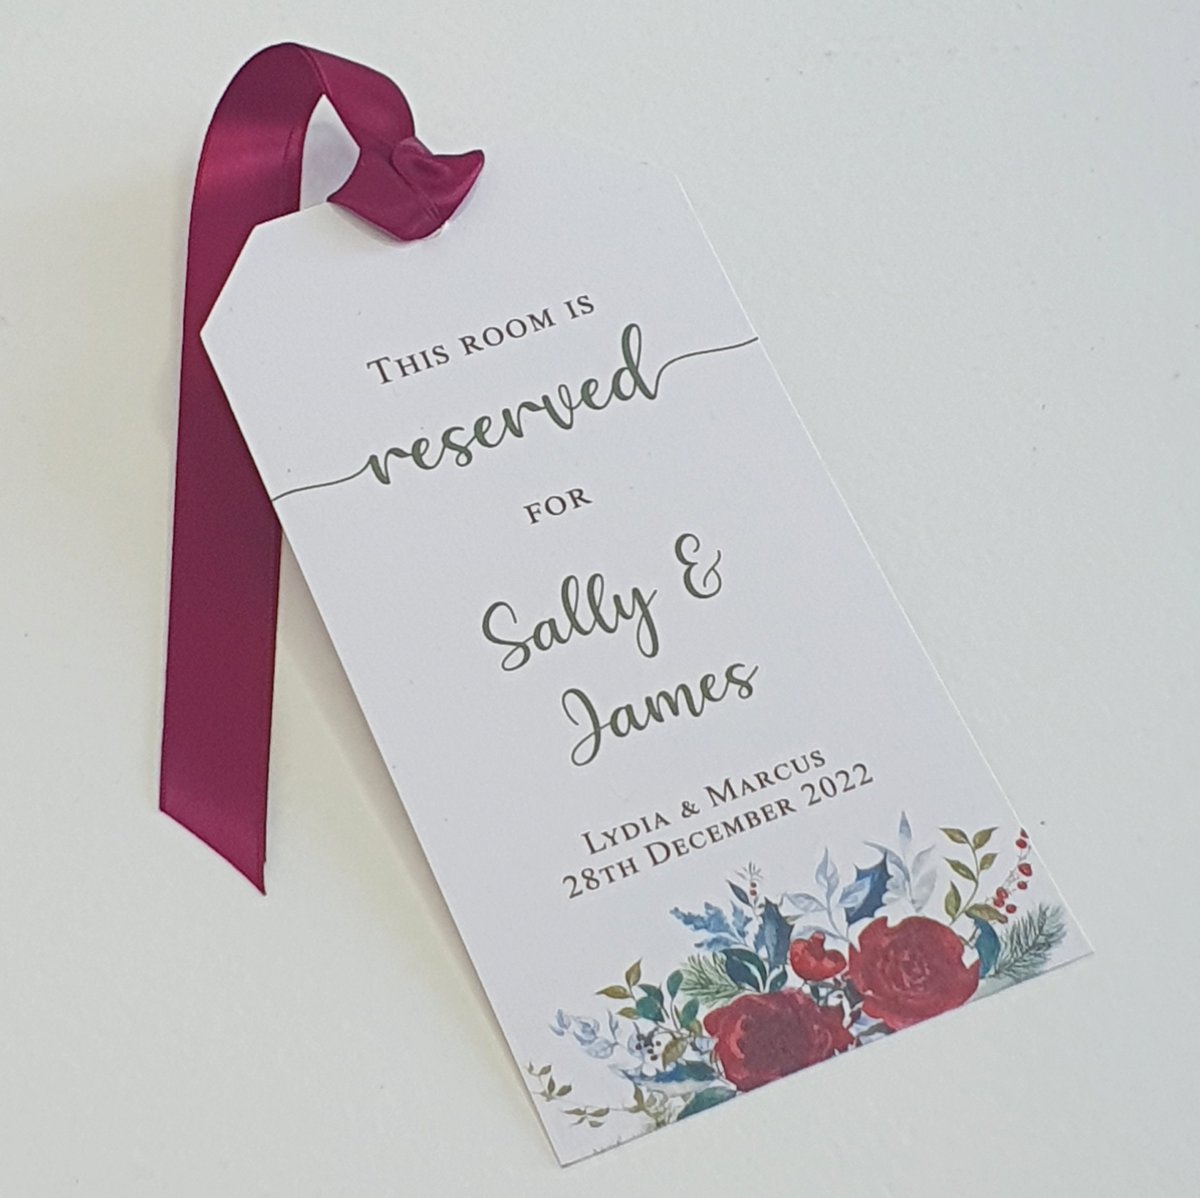 a tag with 'room reserved for sally and james, for a wedding guest room, decorated with a festive floral design in red and green